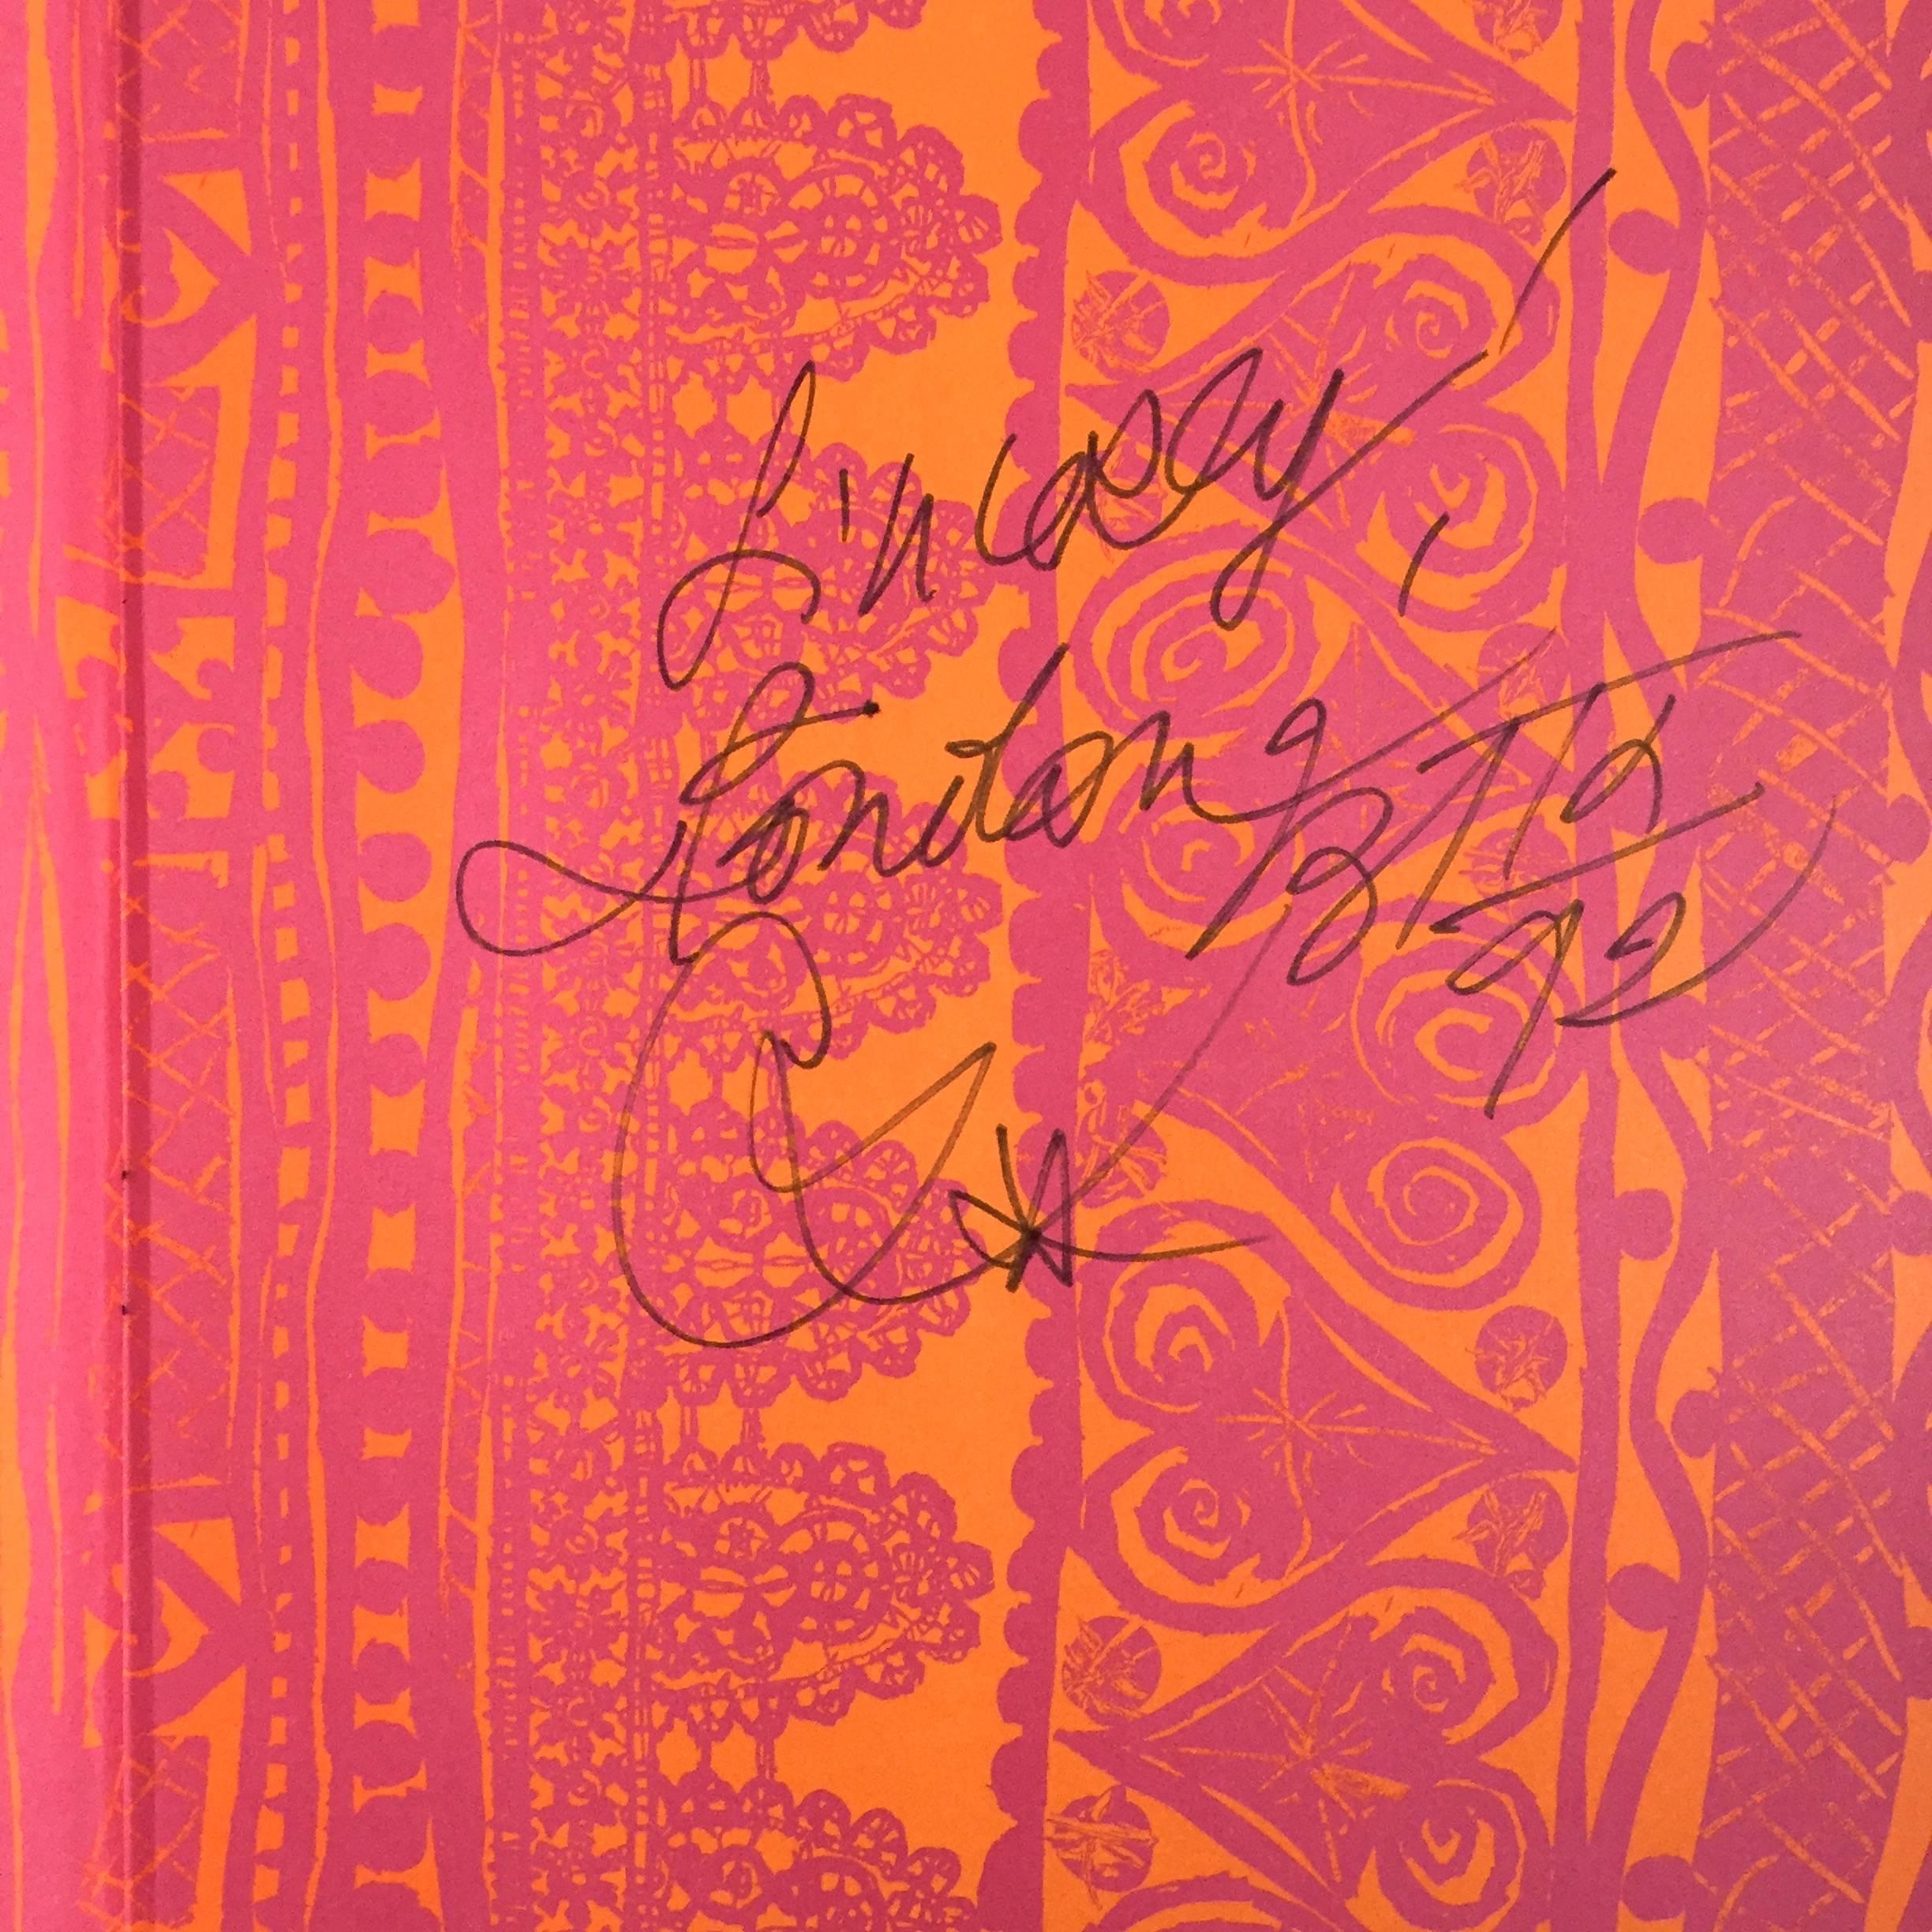 First edition, published by Thames & Hudson in 1992, signed copy by Lacroix.

Edited and introduced by Patrick Mauriès
with over 260 illustrations, 134 in colour.

This book chronicles the life of creative designer Christian Lacroix, one of